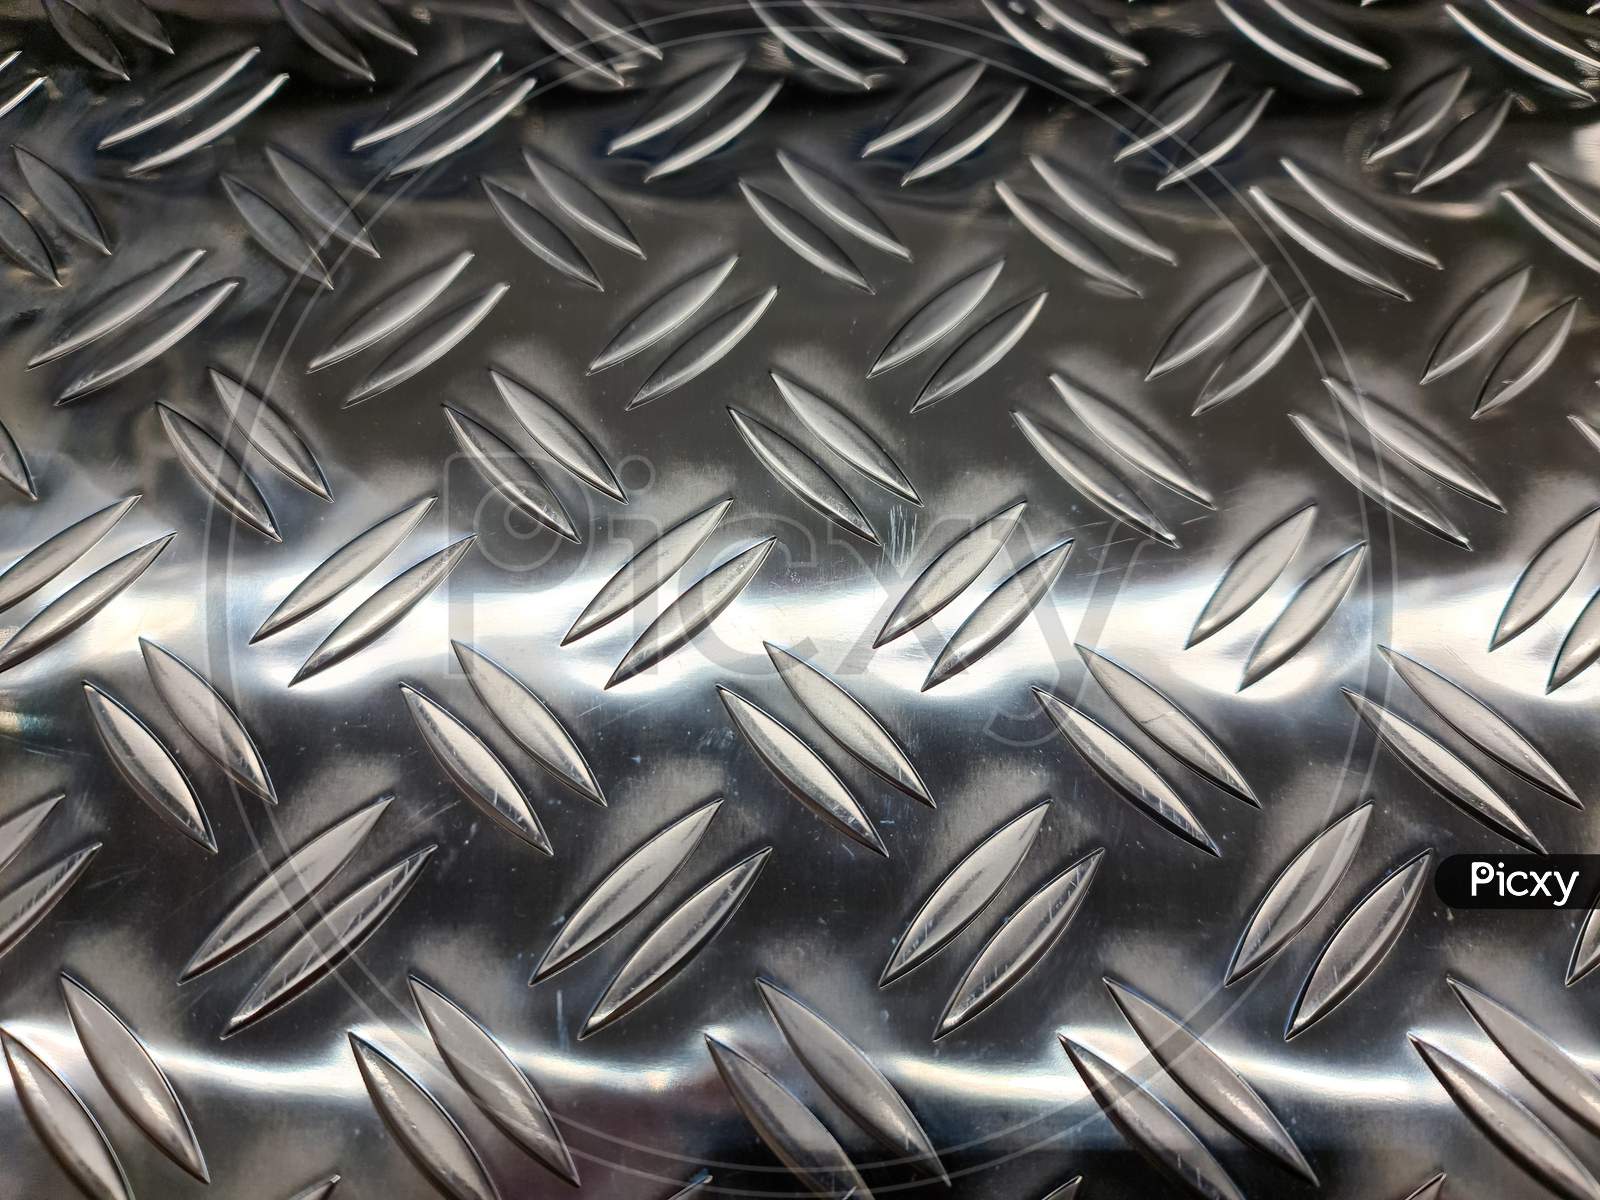 Detailed Close Up View On Metal And Steel Surfaces.